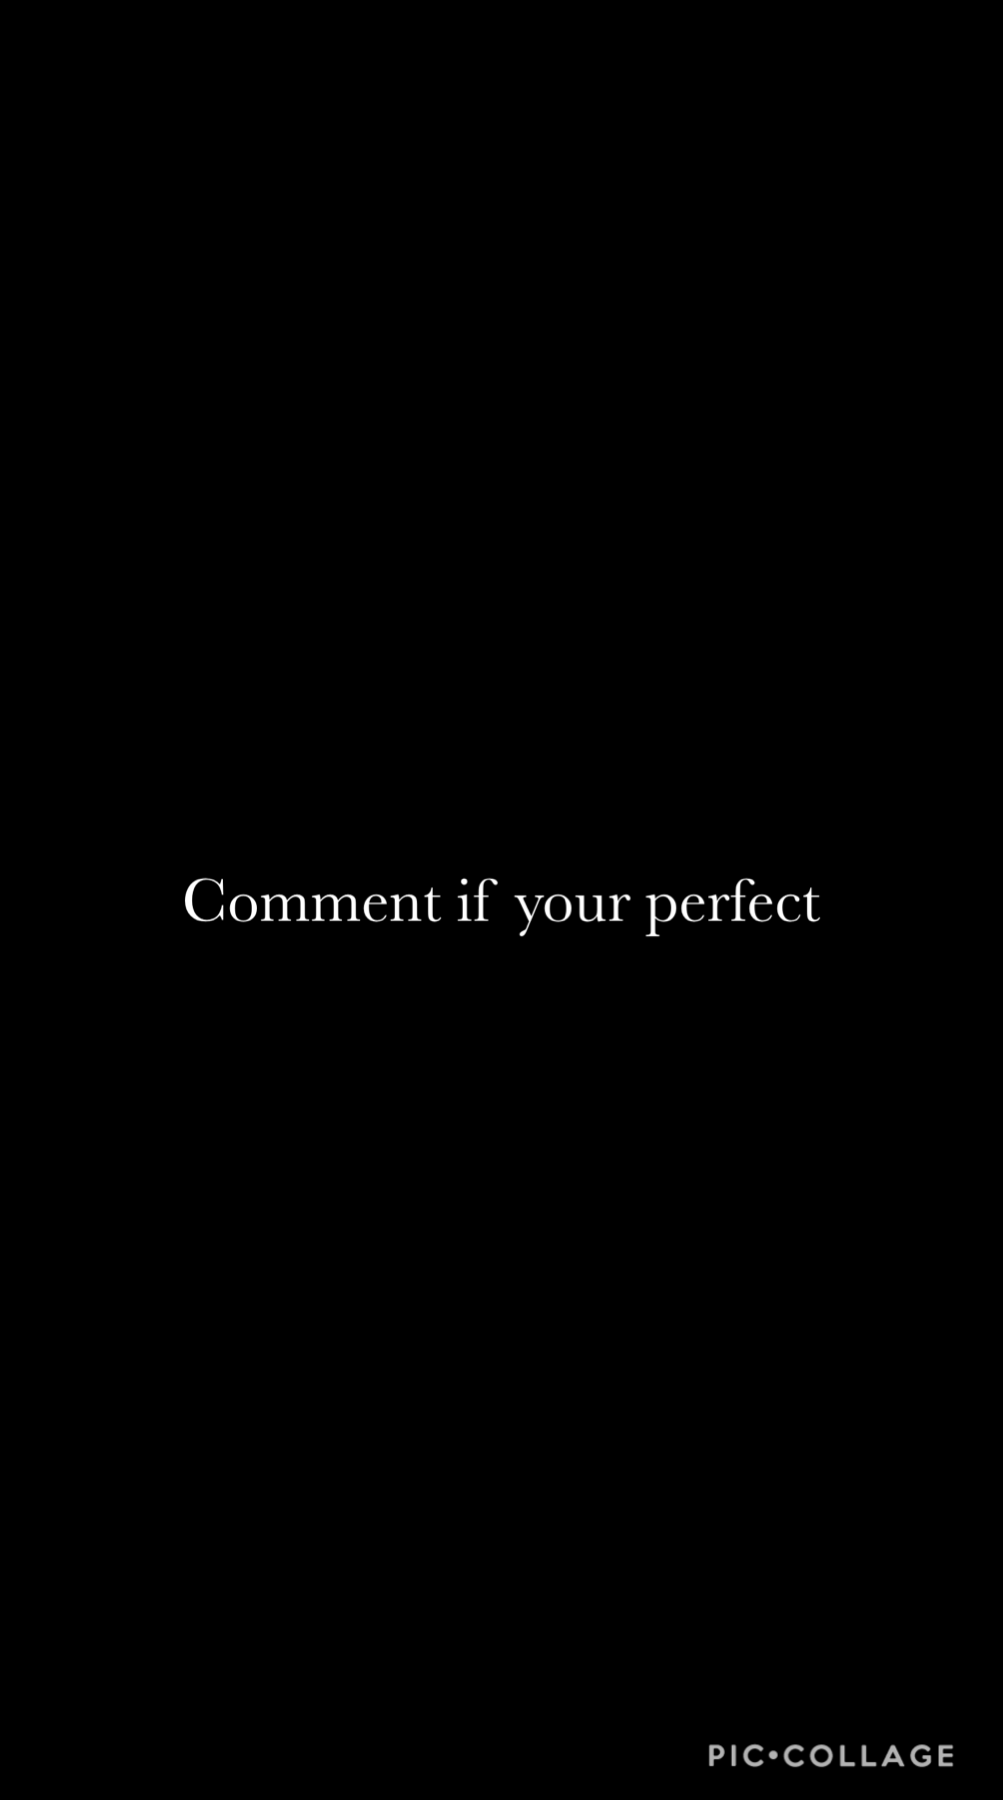 Quick tip nobody should comment because we all have our flaws but that doesn’t mean that we’re not beautiful❤️